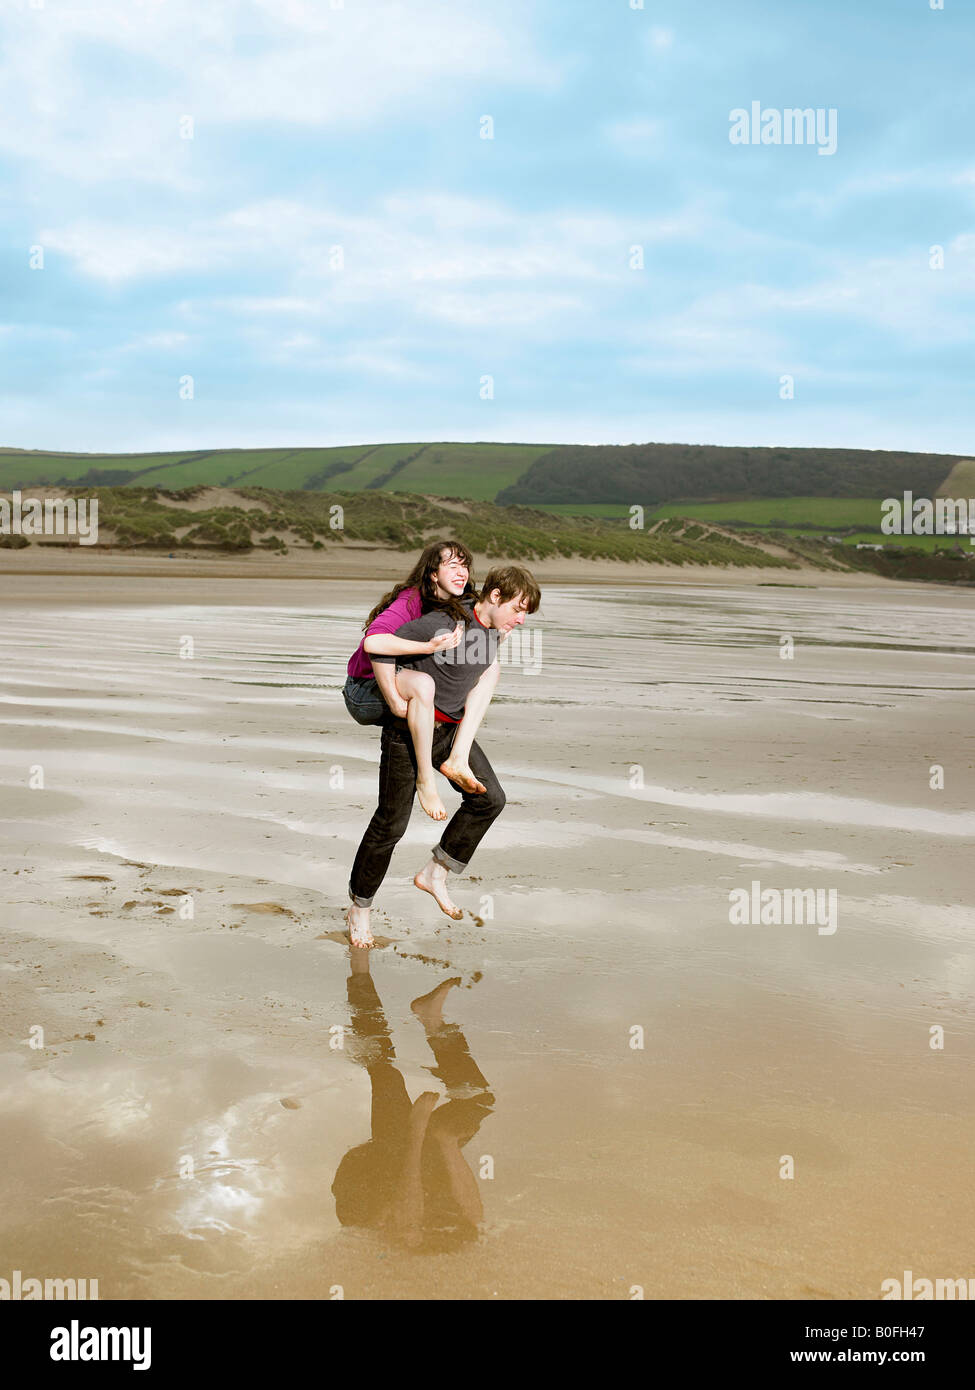 Man carrying woman piggy back on beach Banque D'Images